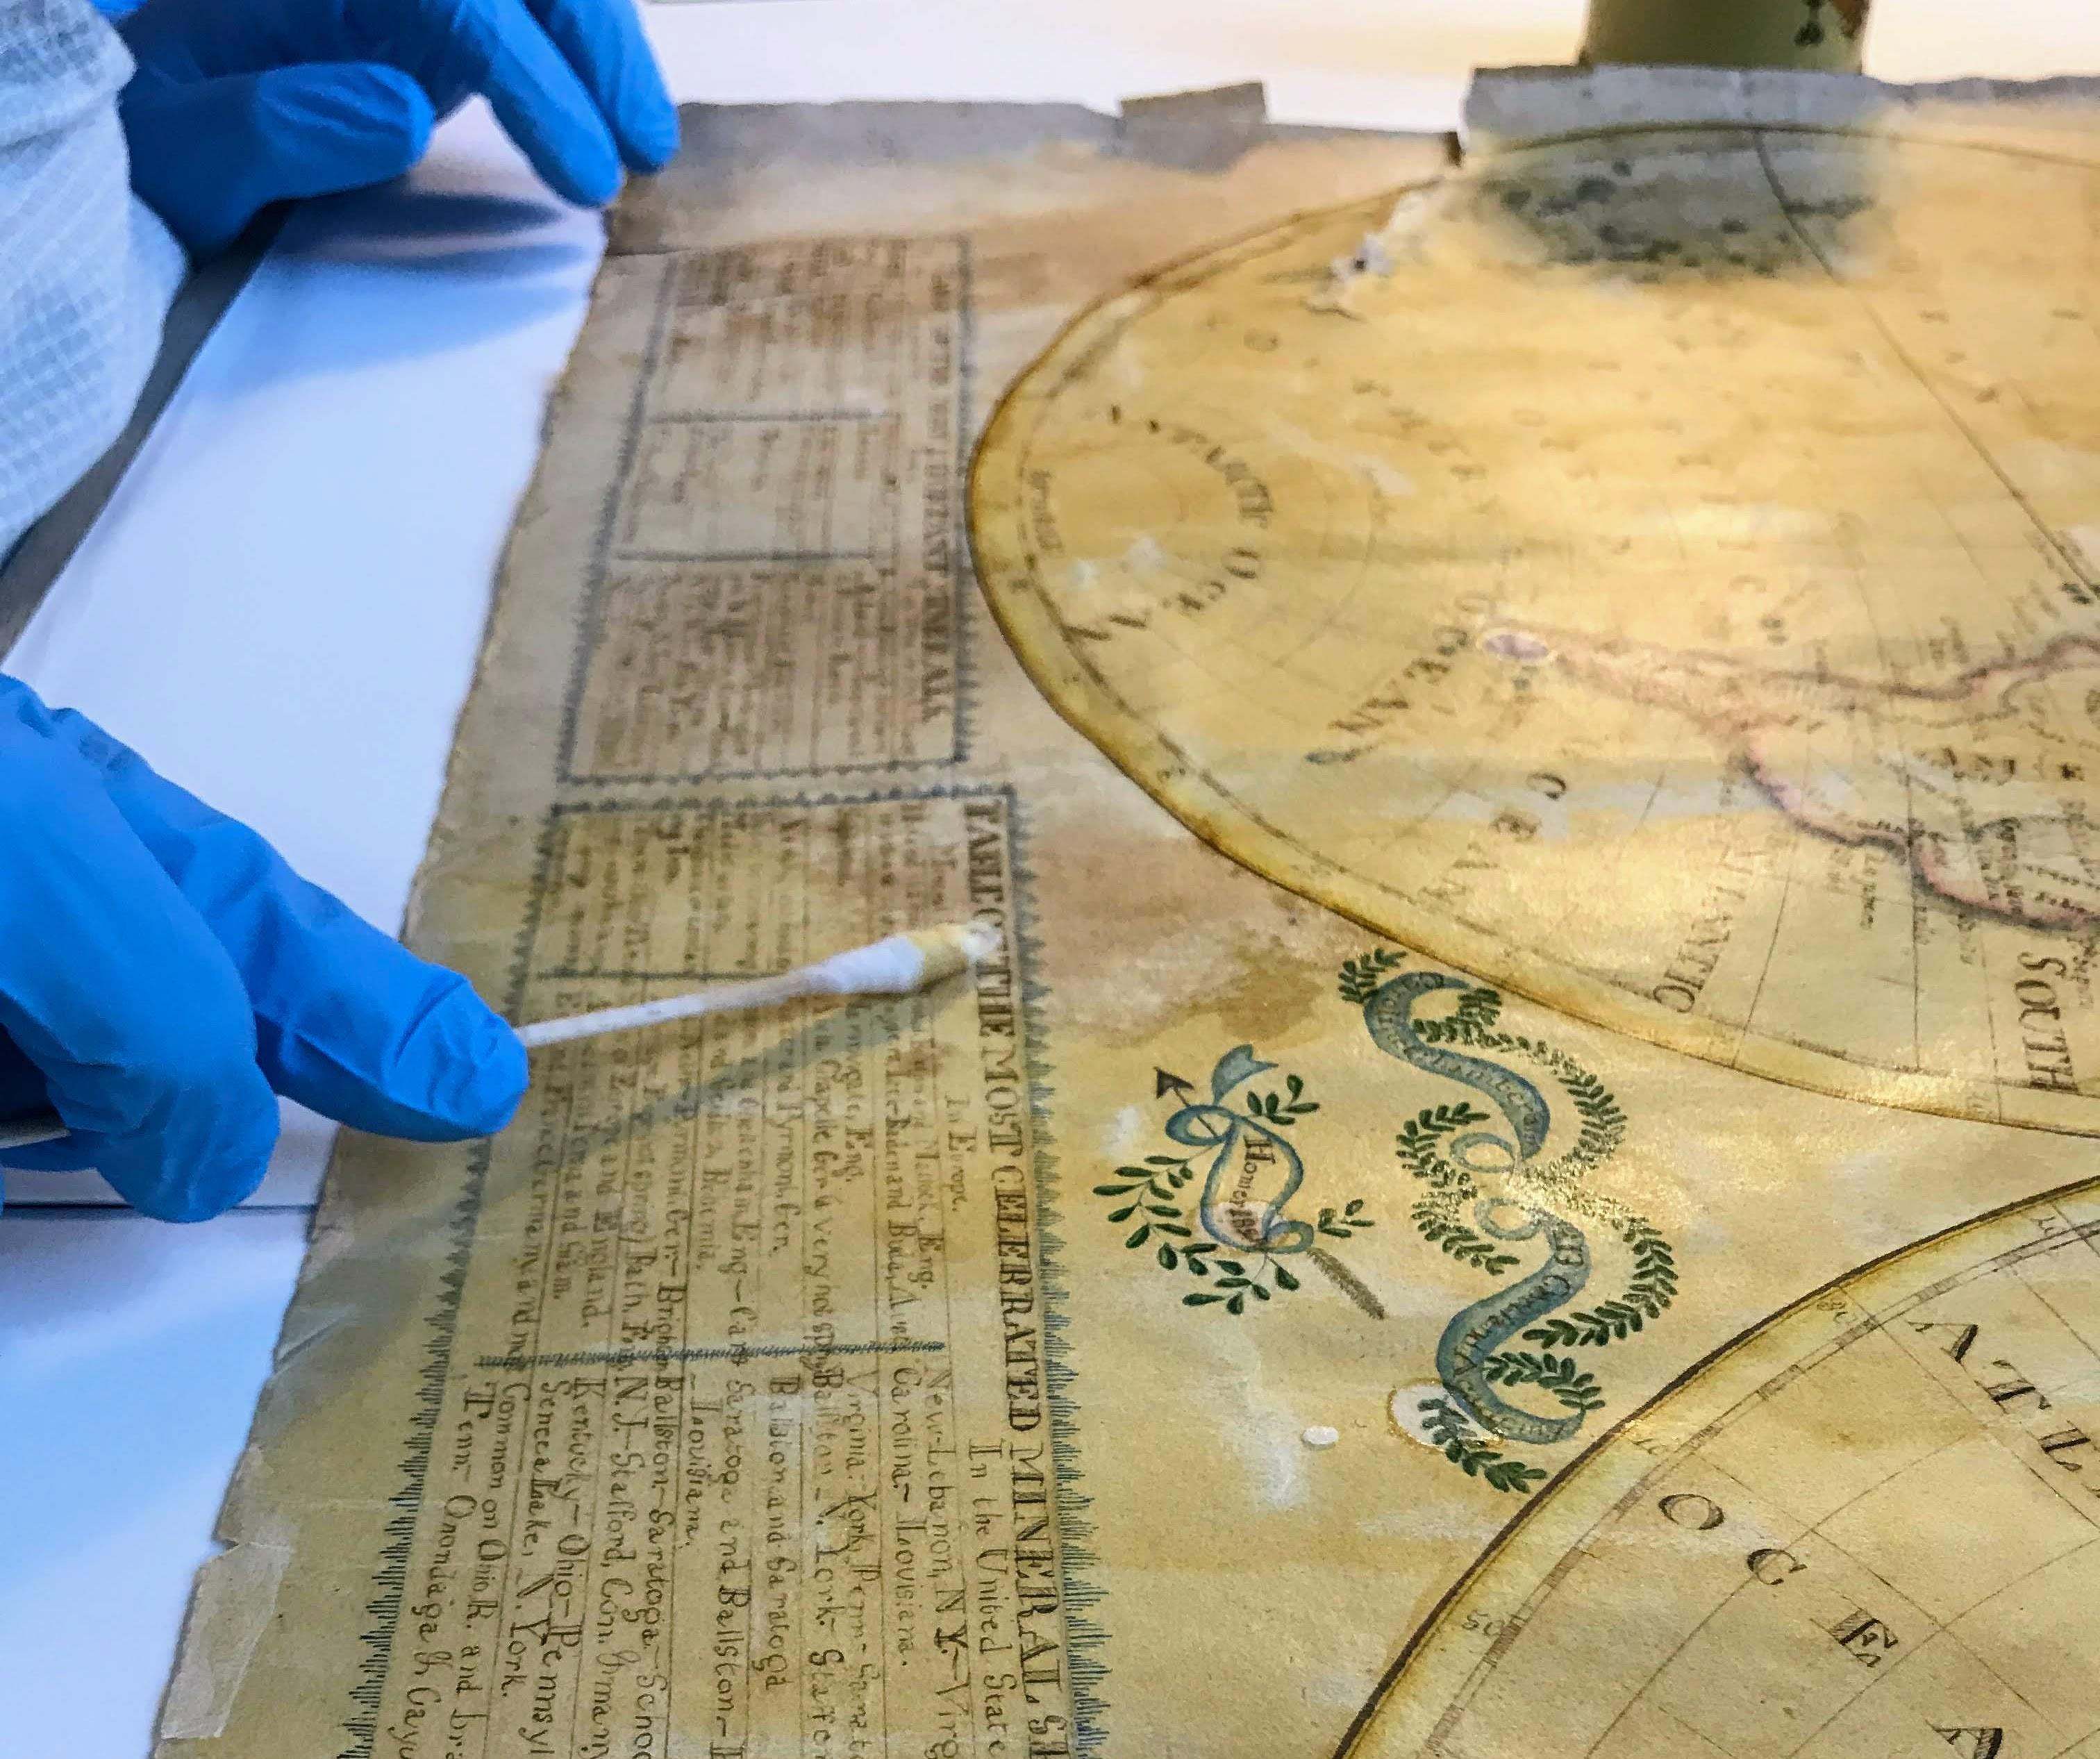 Paper Preservation: How Are The Historical Documents And Artifacts Preserved From Spoiling